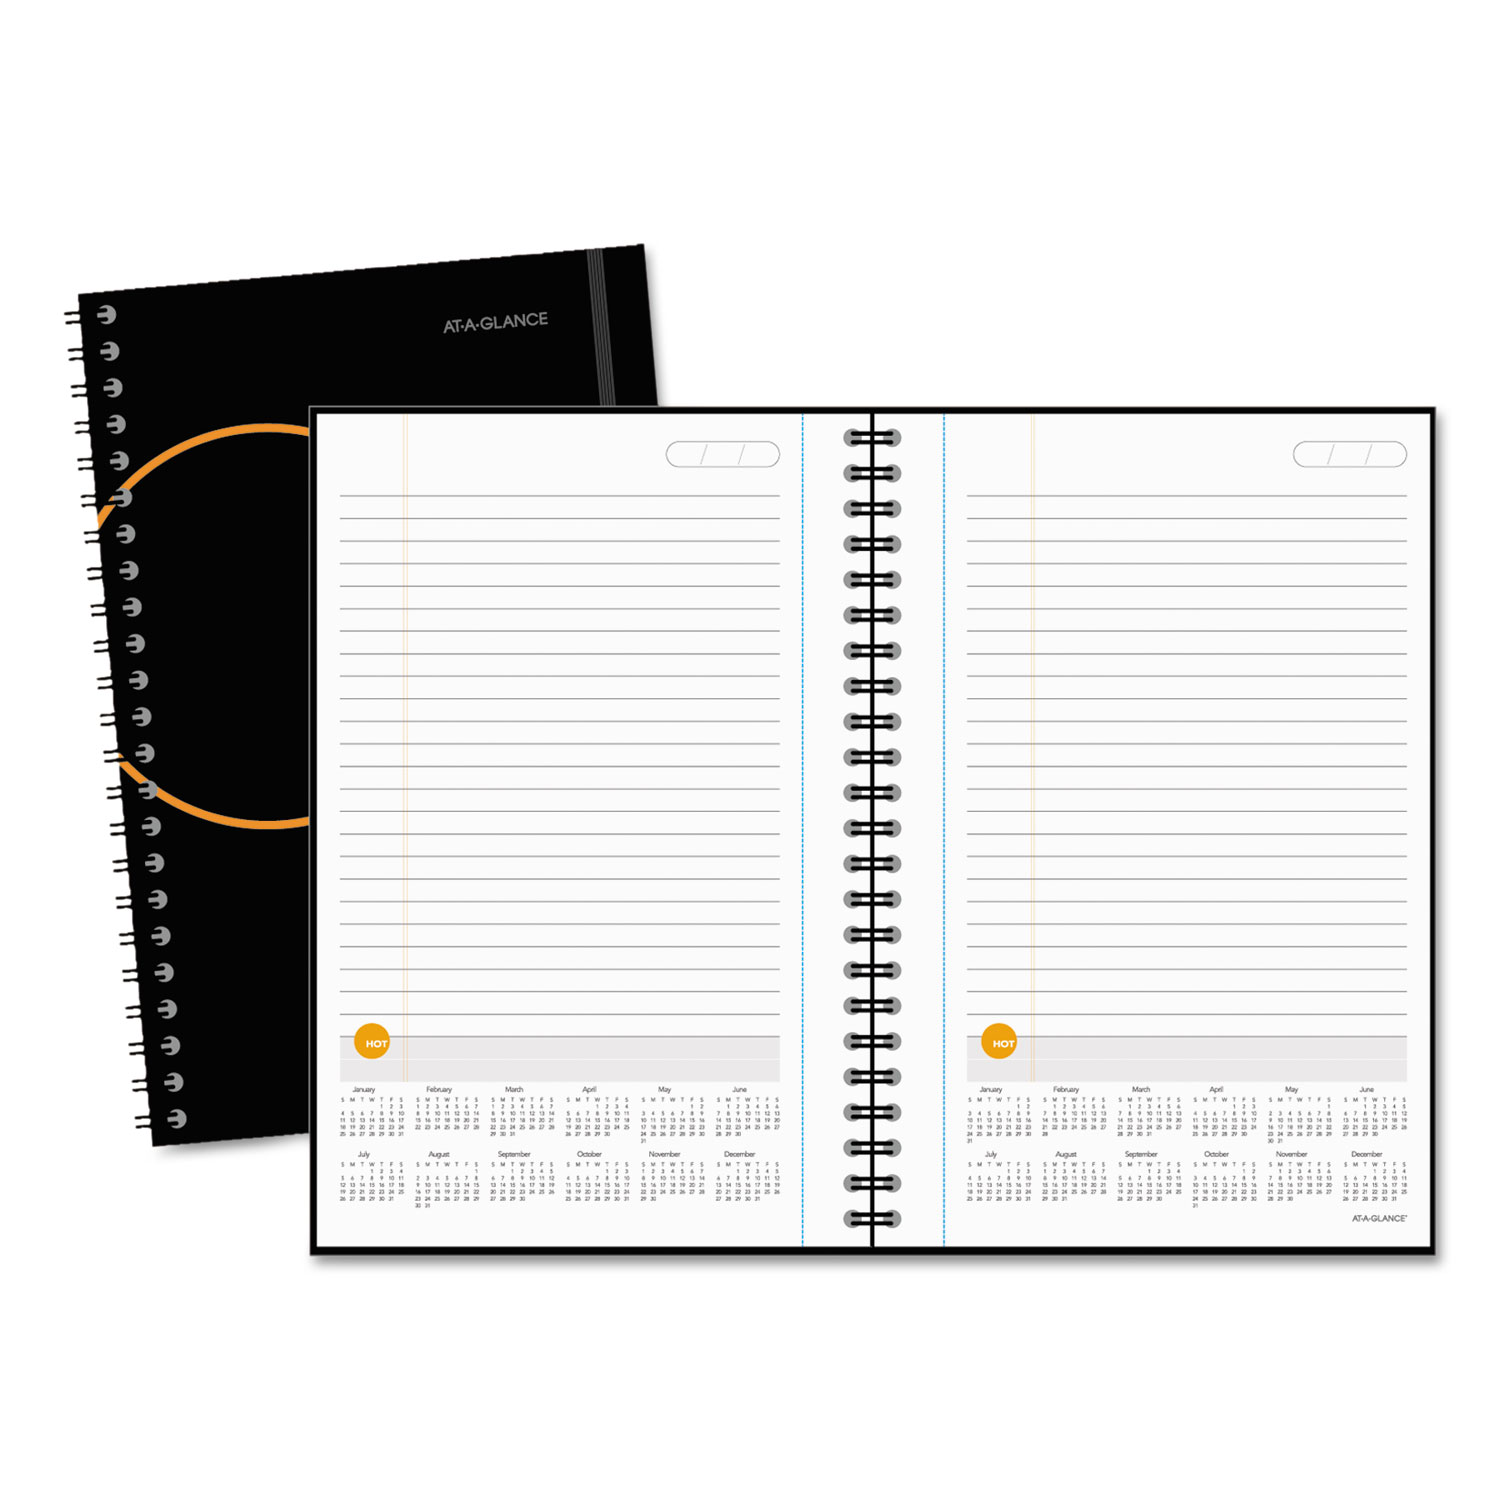  AT-A-GLANCE 70621005 Plan. Write. Remember. Notebook with Reference Calendar, 9 x 5 5/8, Black (AAG70621005) 